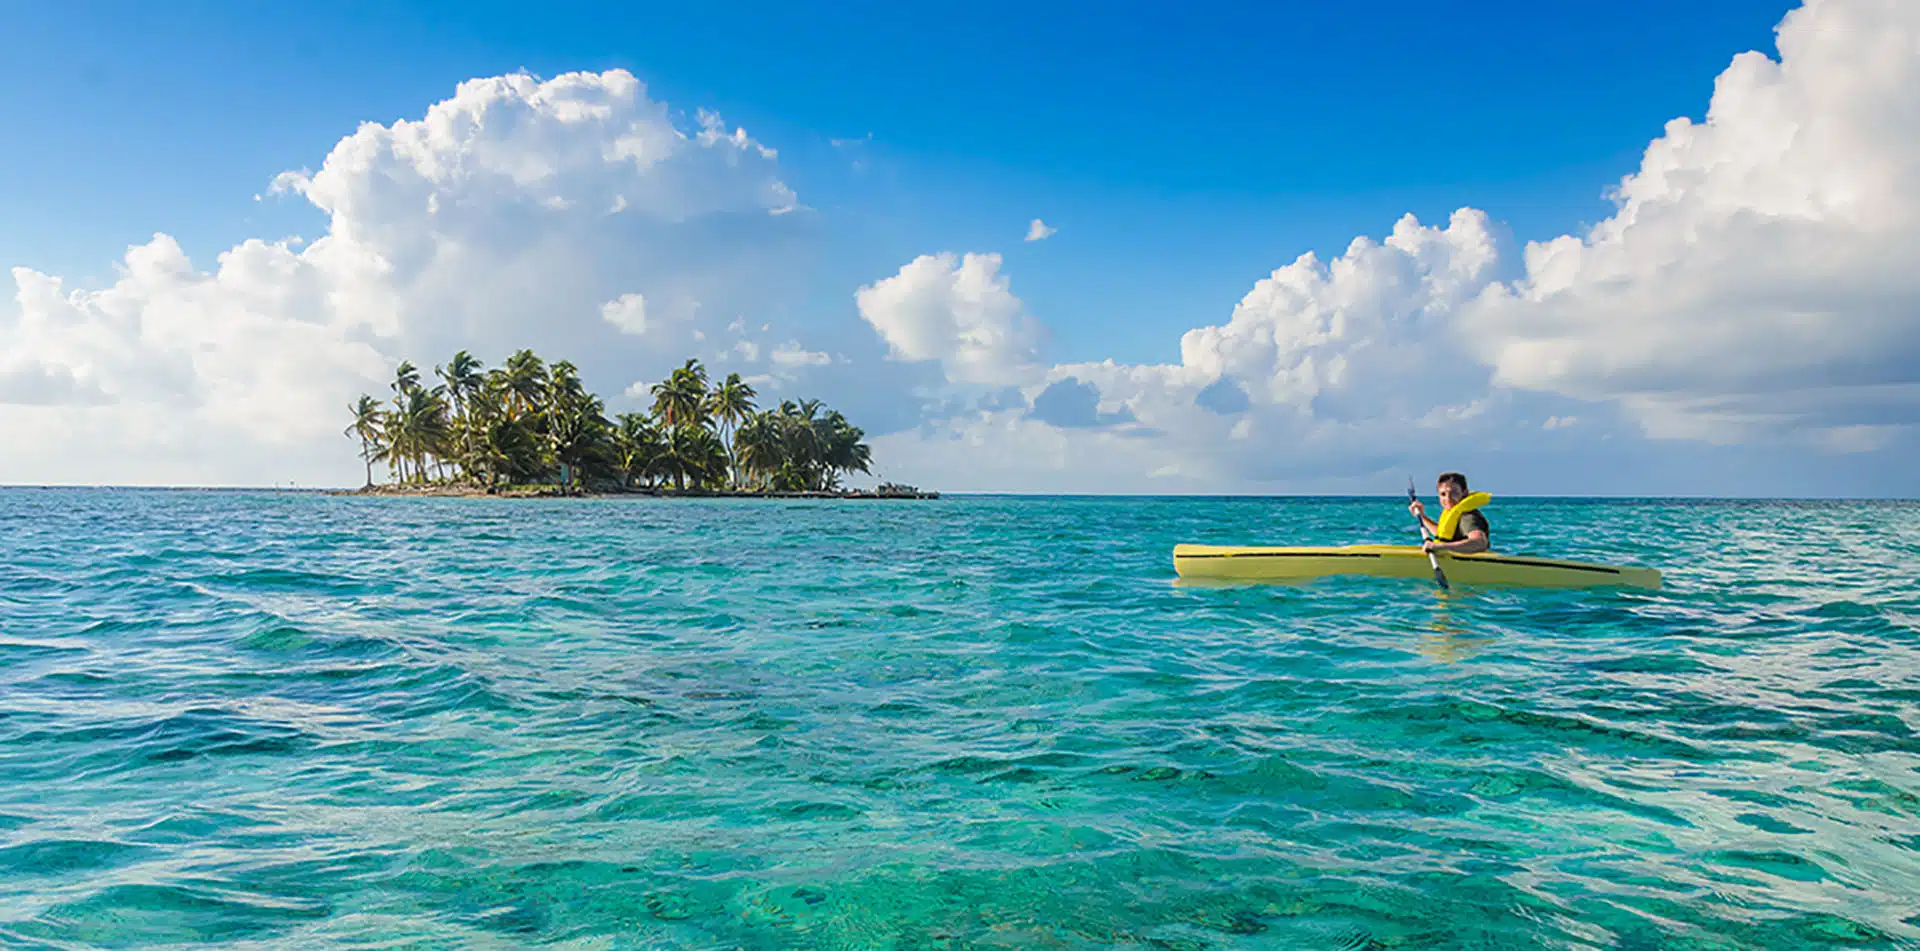 Central America Belize Cayes Islands tropical clear turquoise water man smiling yellow kayak - luxury vacation destinations